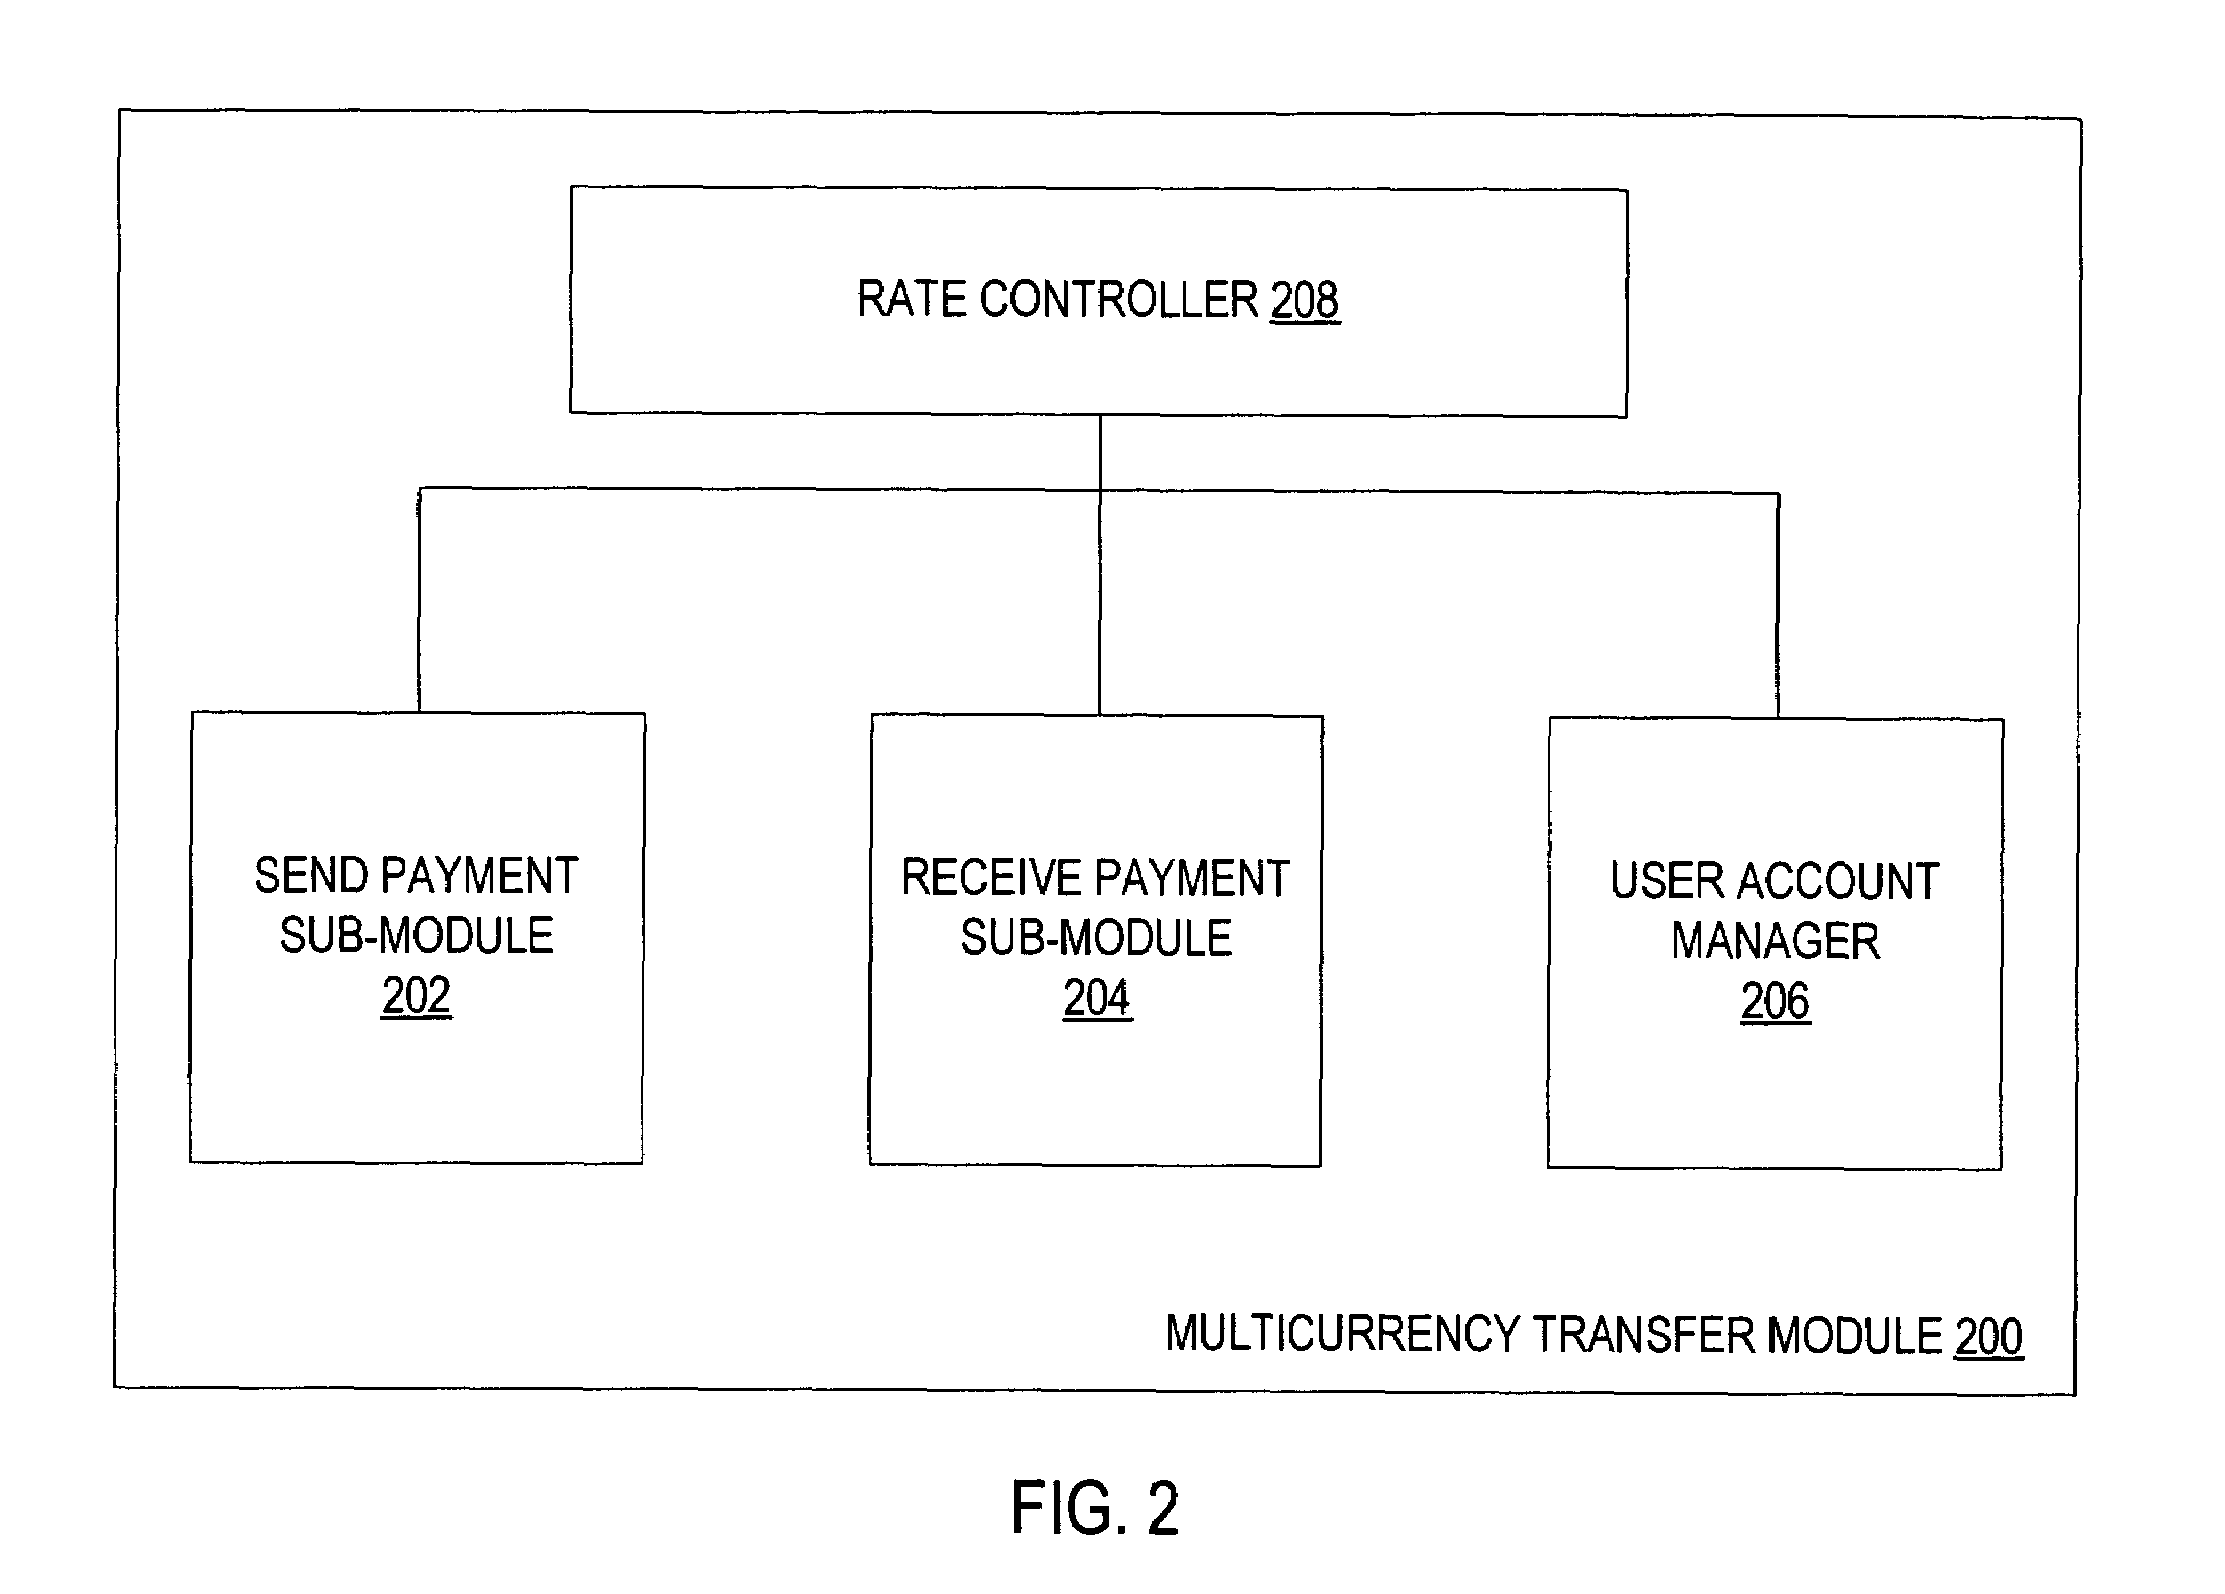 Multicurrency exchanges between participants of a network-based transaction facility